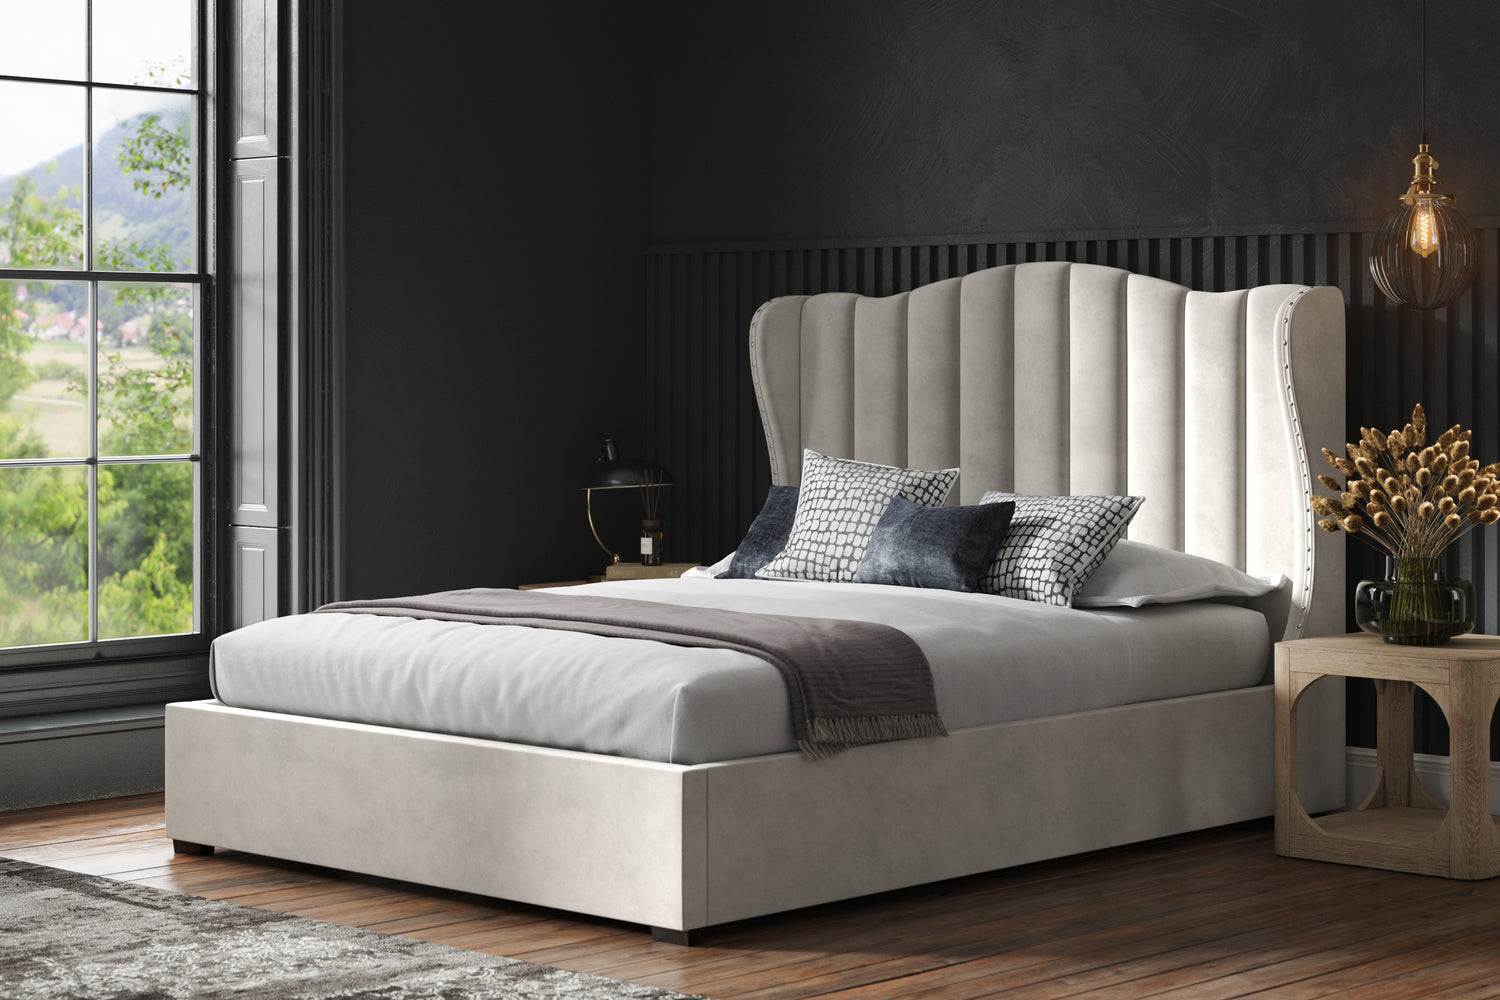 Emporia Beds Sherwood Wing Ottoman Bed Light Grey From Side-Better Bed Company